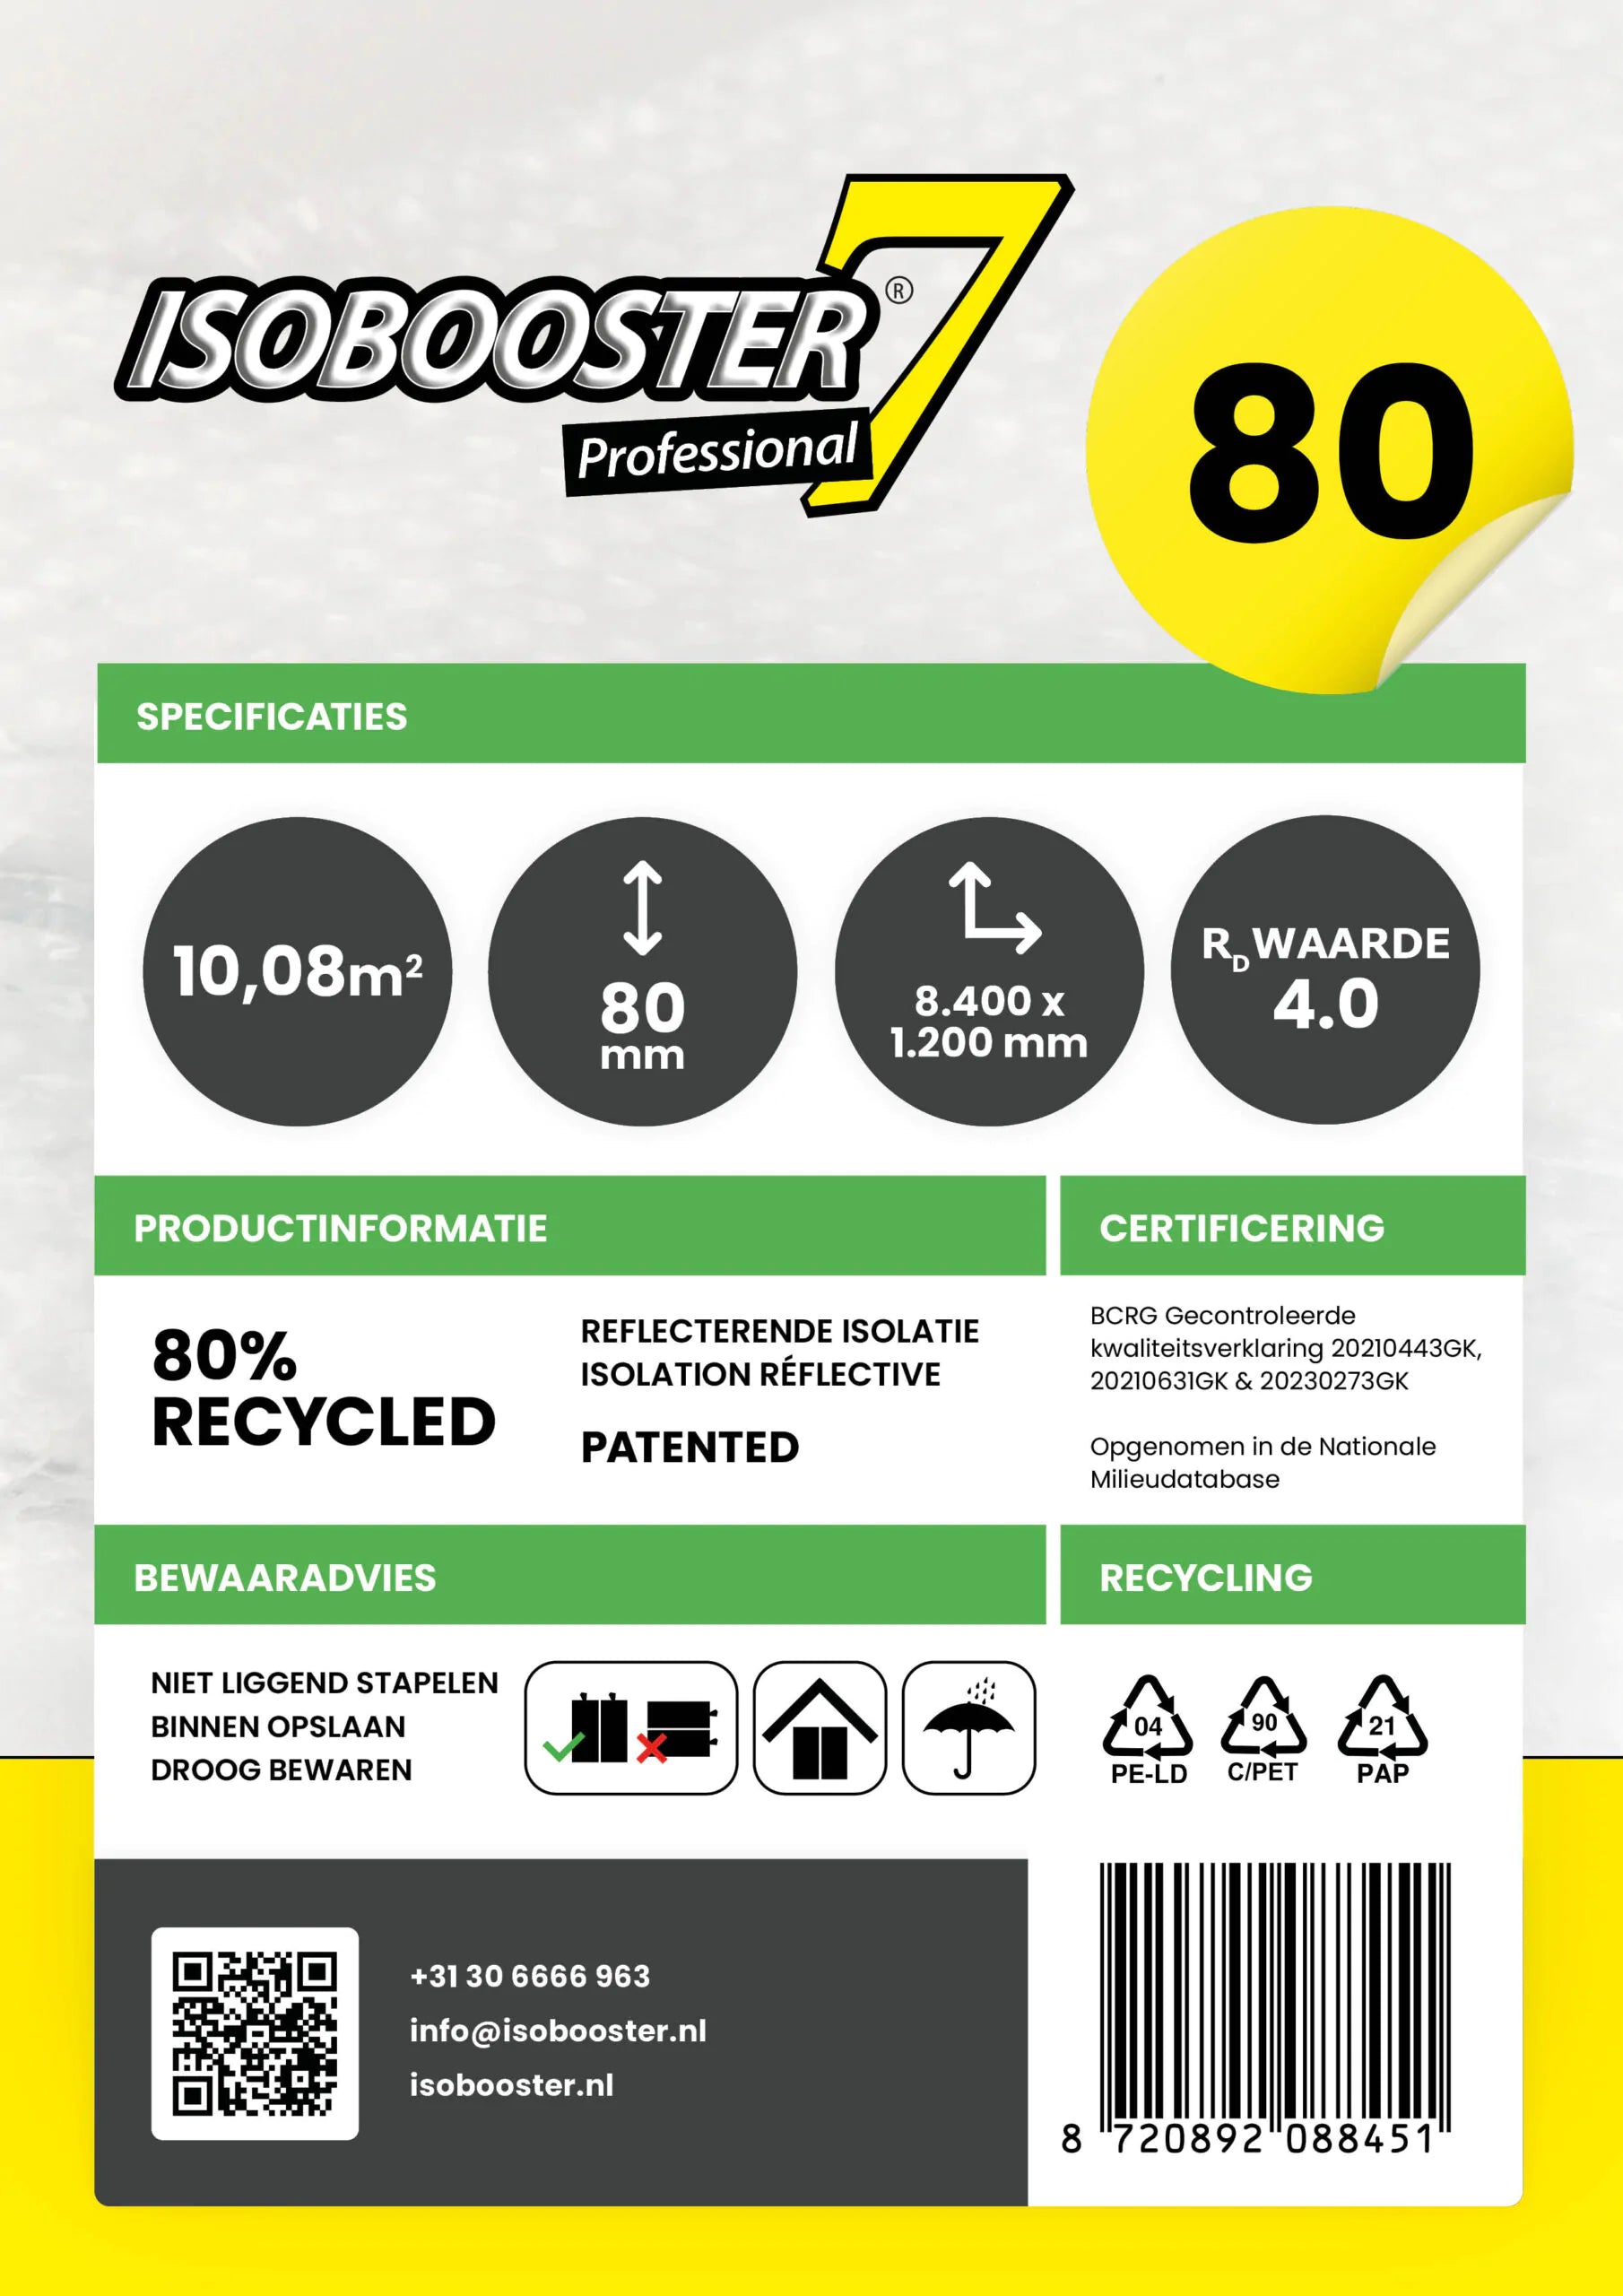 Isobooster Professionnel 80mm